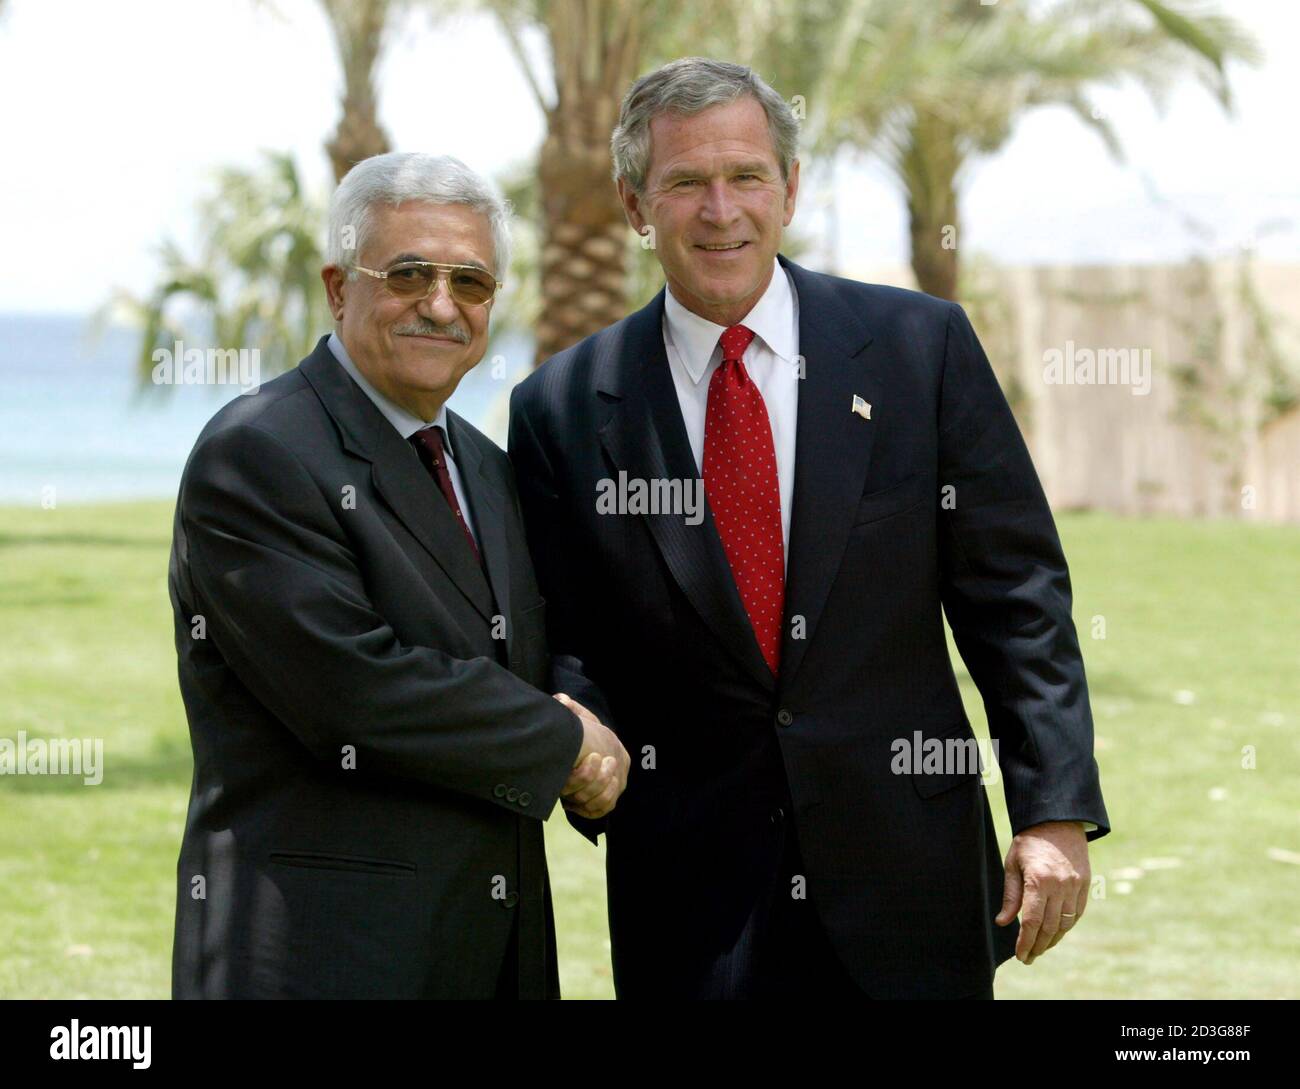 U.S. President George W. Bush (R) meets with the Prime Minister of Palestine Mahmoud Abbas at the Summer Palace in the southern Jordanian port town of Aqaba June 4, 2003. [One of the most important aspects of Bush's week-long trip to Europe and the Middle East will be a trilateral meeting between Abbas and Israeli Prime Minister Ariel Sharon on Wednesday, intended to win their commitment to implementing a 'road map' to Middle East peace.] Stock Photo